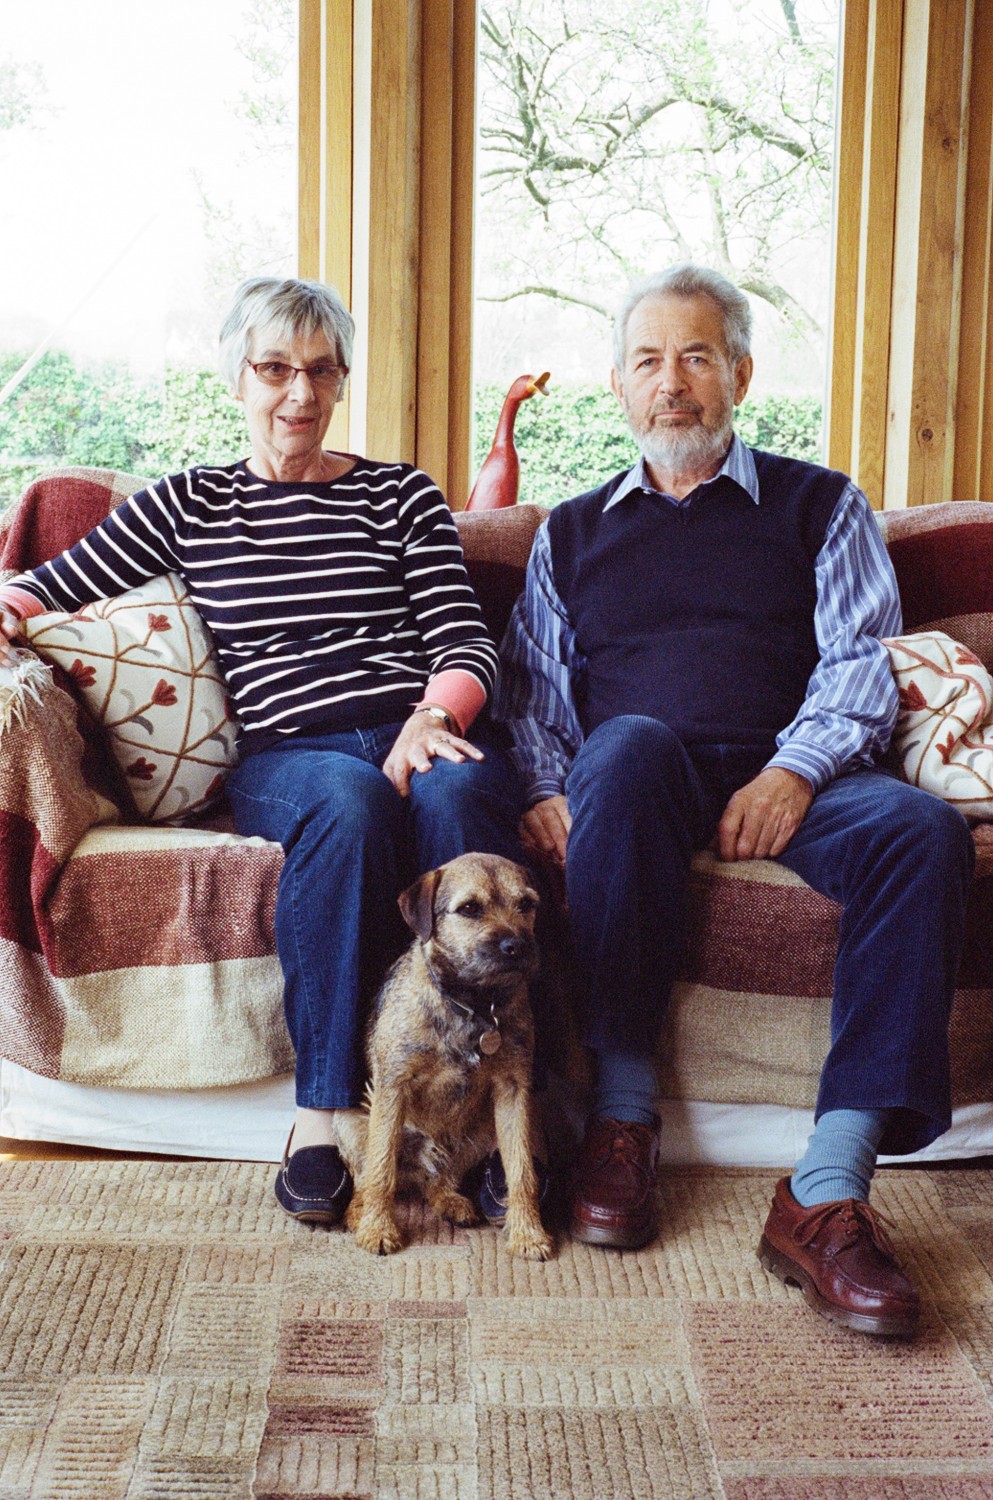 Anne and John Bourne (and the dog) in the Garden Room, April 2014